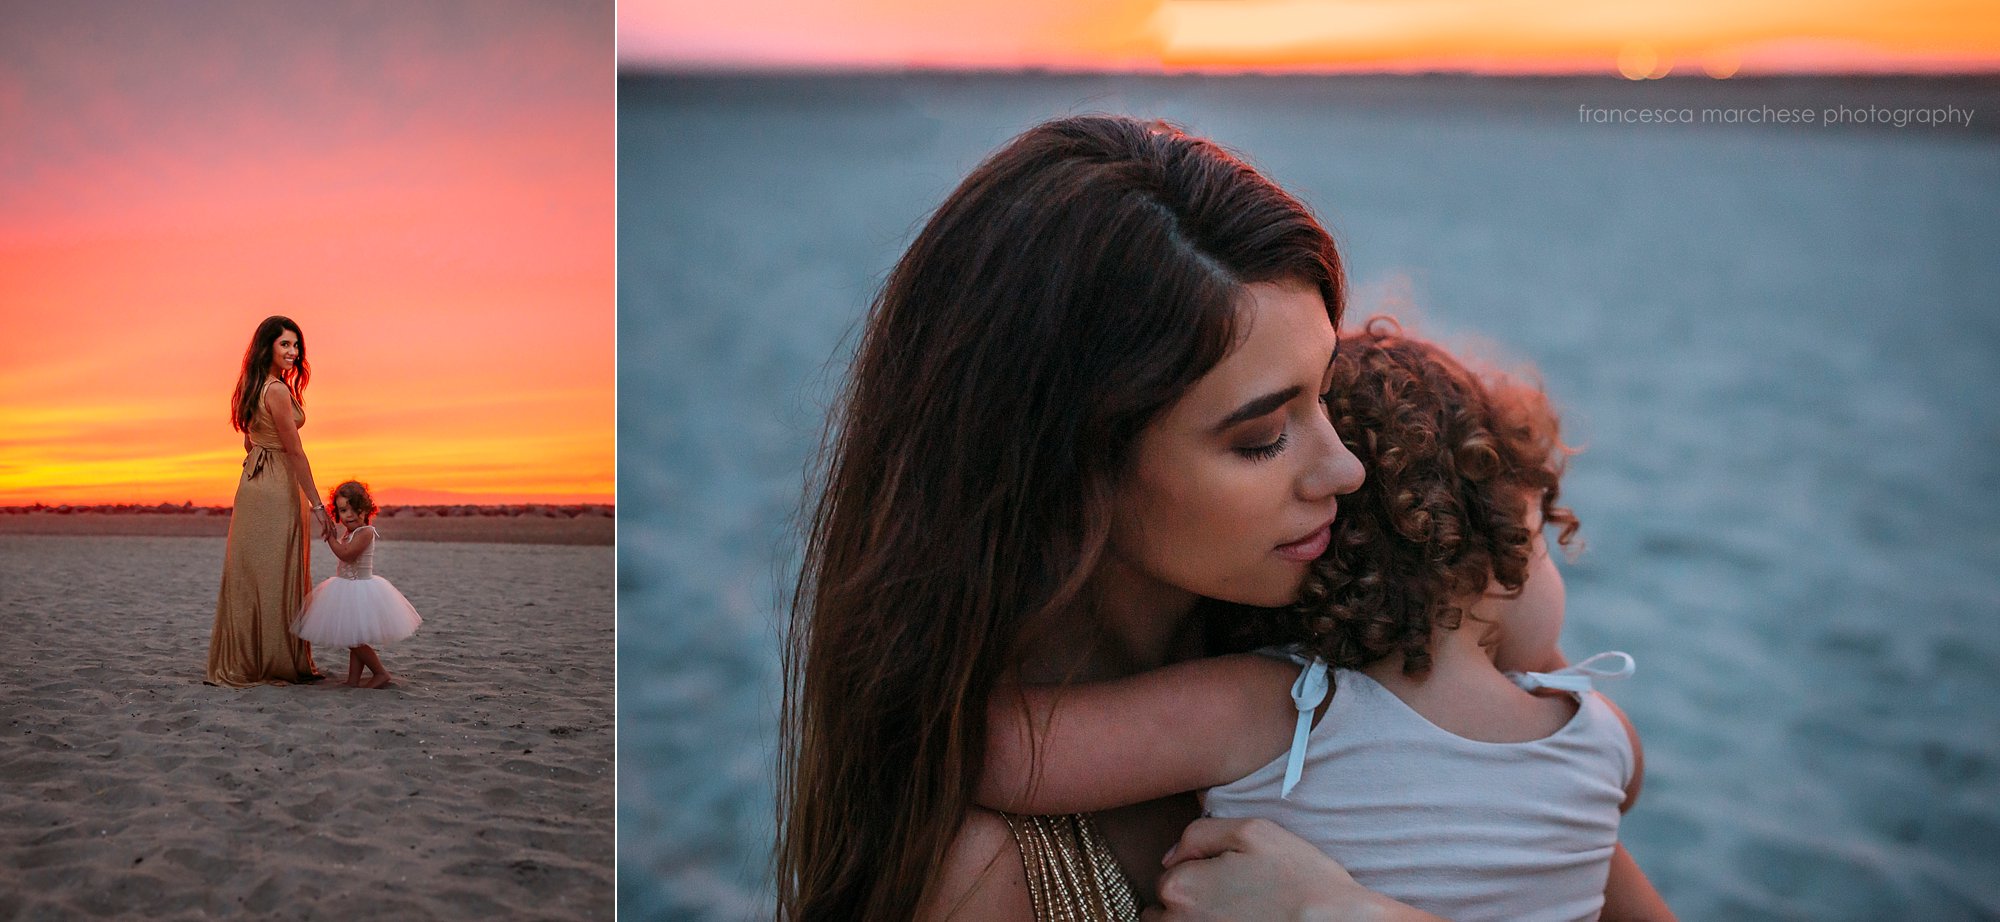 Francesca Marchese Photography - Family Photographer Starkman Family sunset beach session - mother and young child at sunset